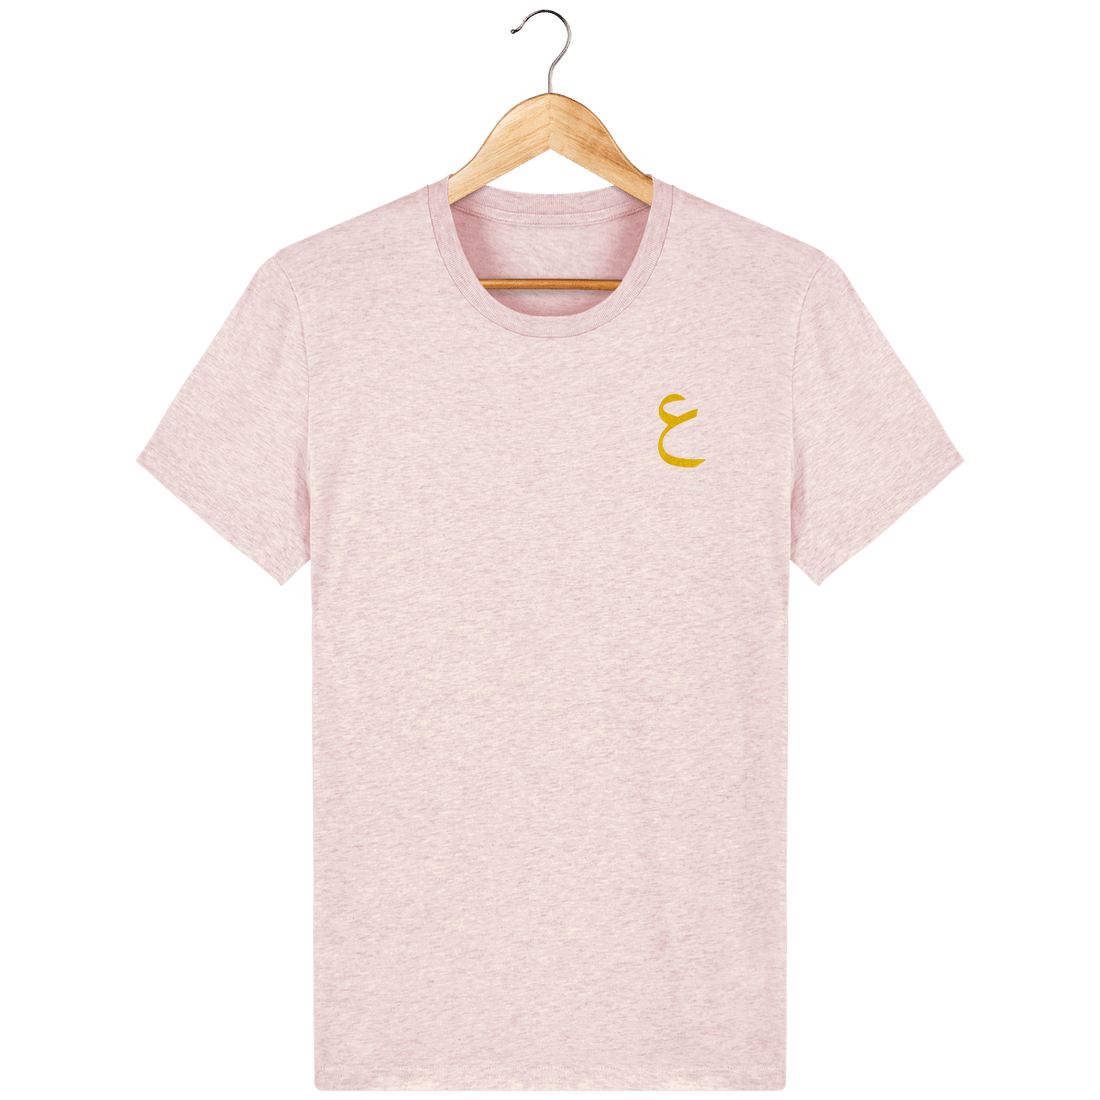 Unisexe>Tee-shirts - T-Shirt Homme <br> Lettre Arabe Ayn